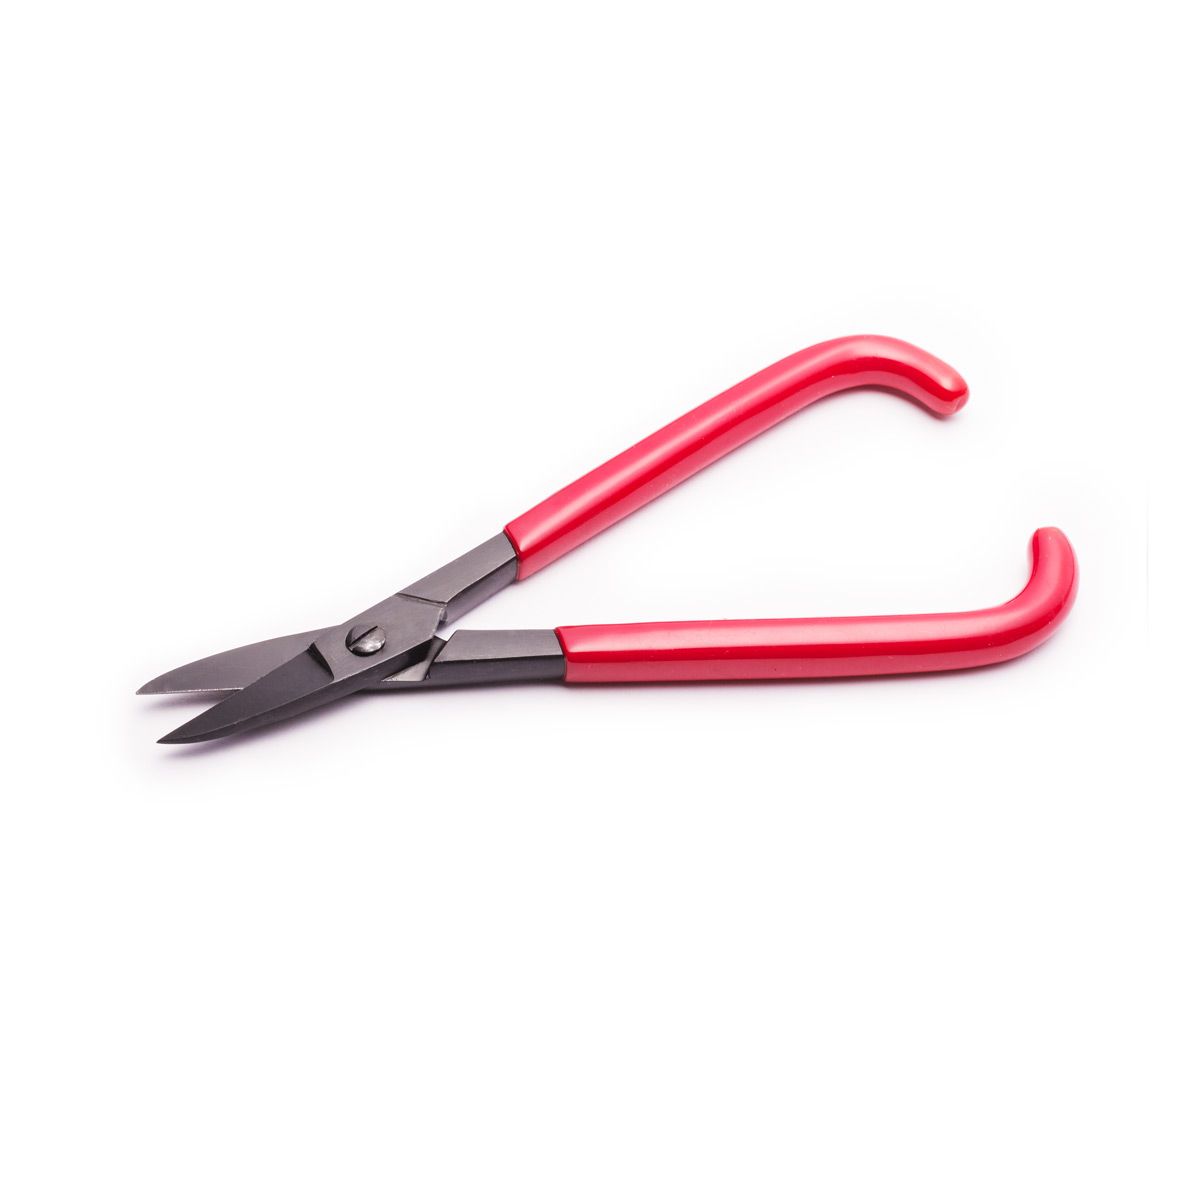 Pliers for Jewelry Making, Jewelry Pliers Set Includes Needle Nose Pliers,  Ro